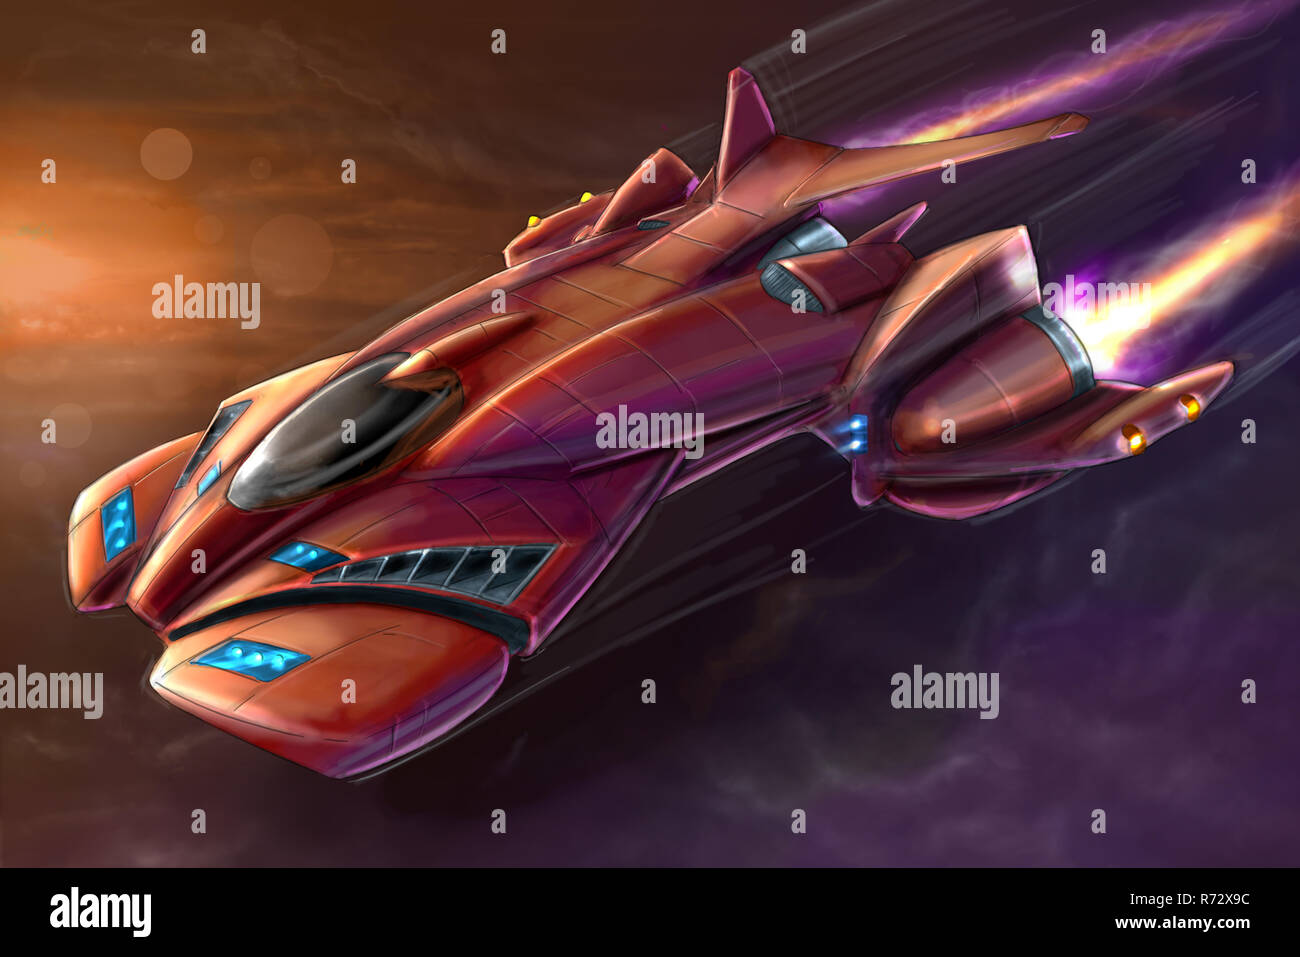 Concept Art Painting of Futuristic Space Ship or Aircraft Stock Photo